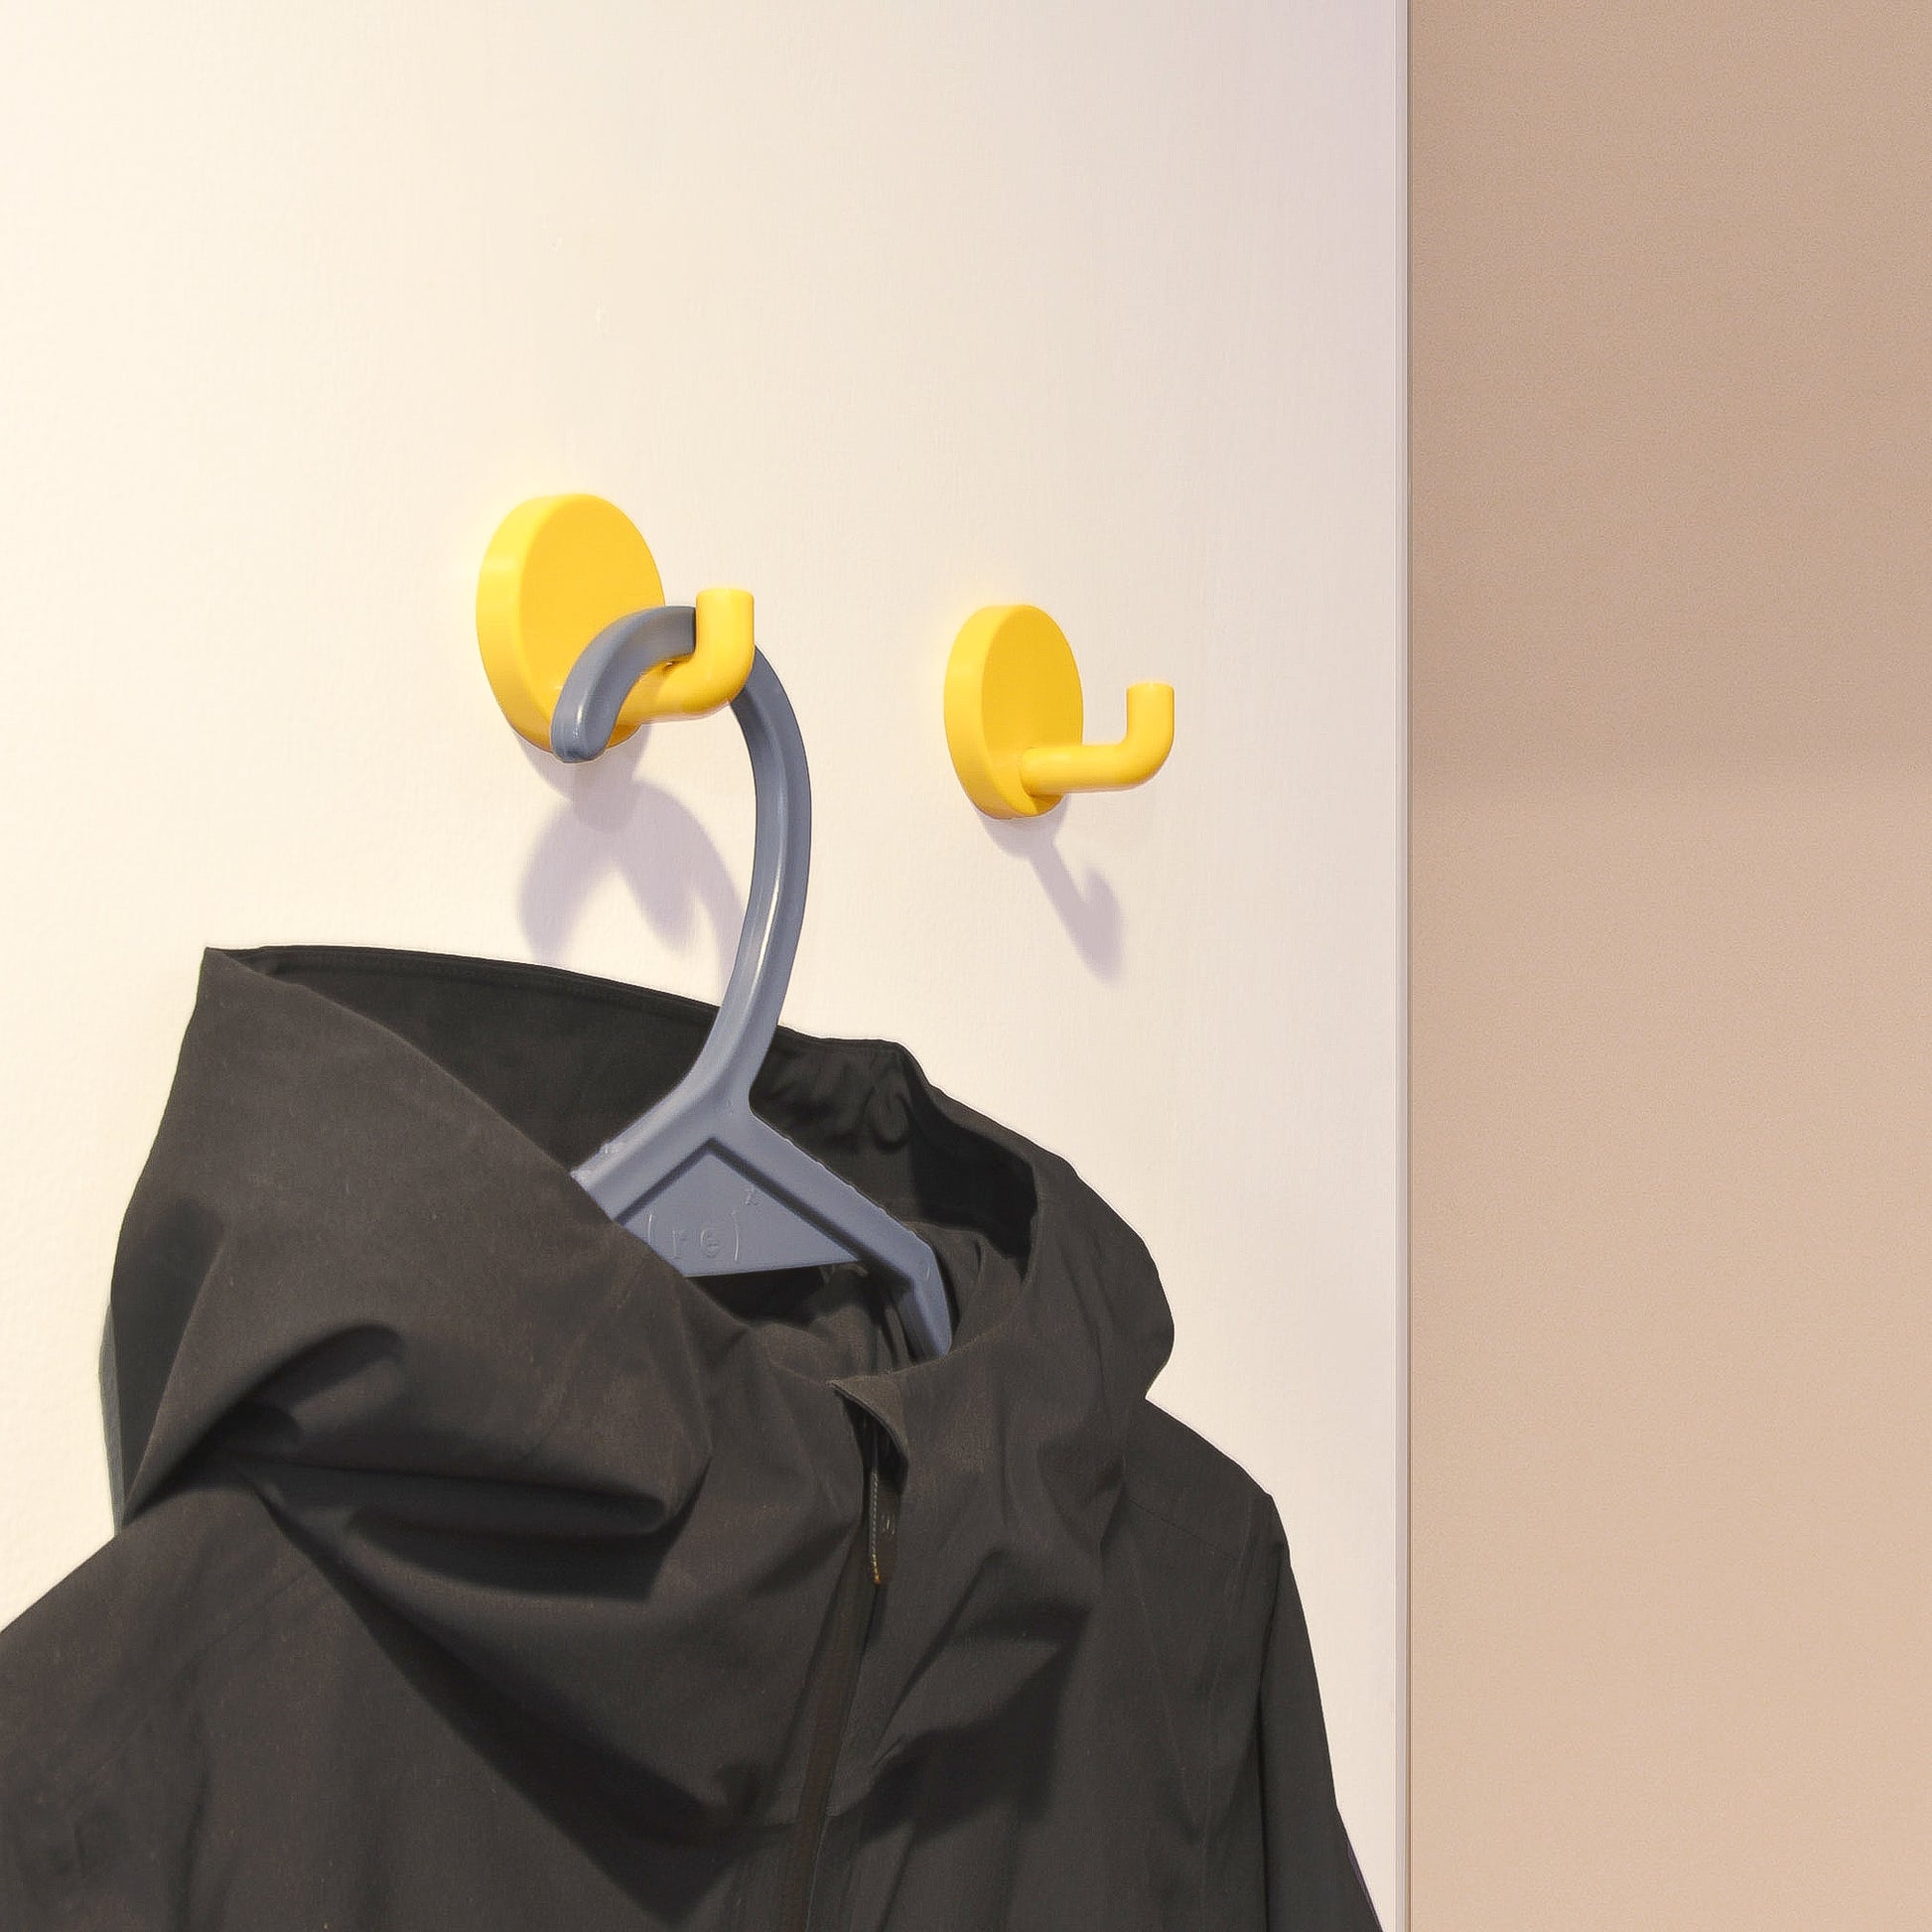 Black outerwear hangs from a grey recycled ocean plastic hanger by (re)x